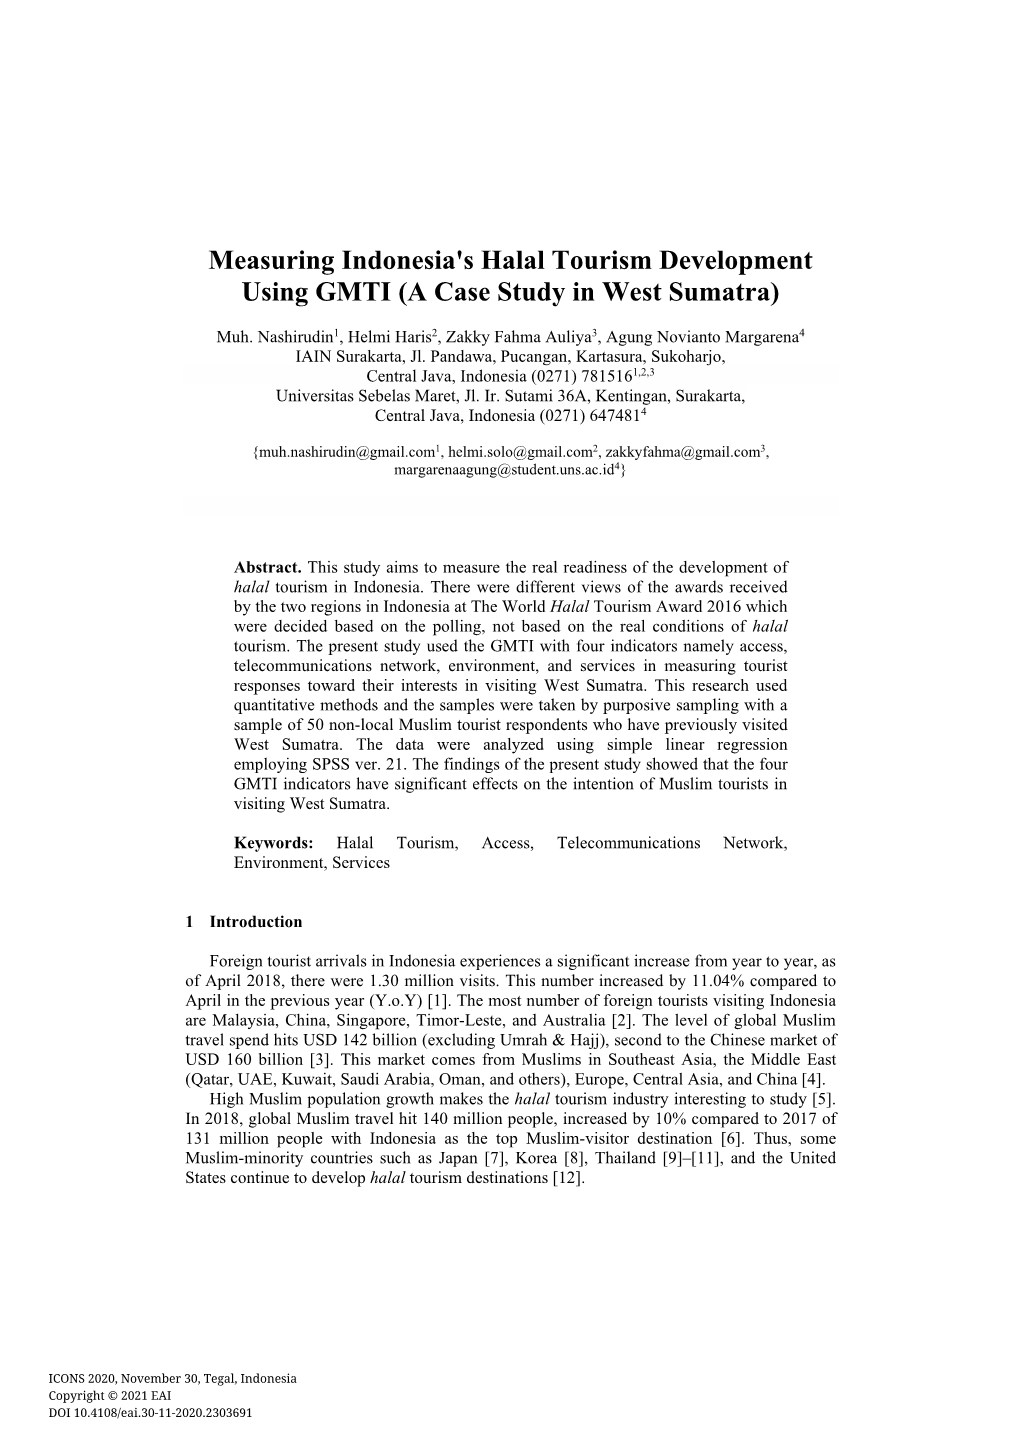 Measuring Indonesia's Halal Tourism Development Using GMTI (A Case Study in West Sumatra)